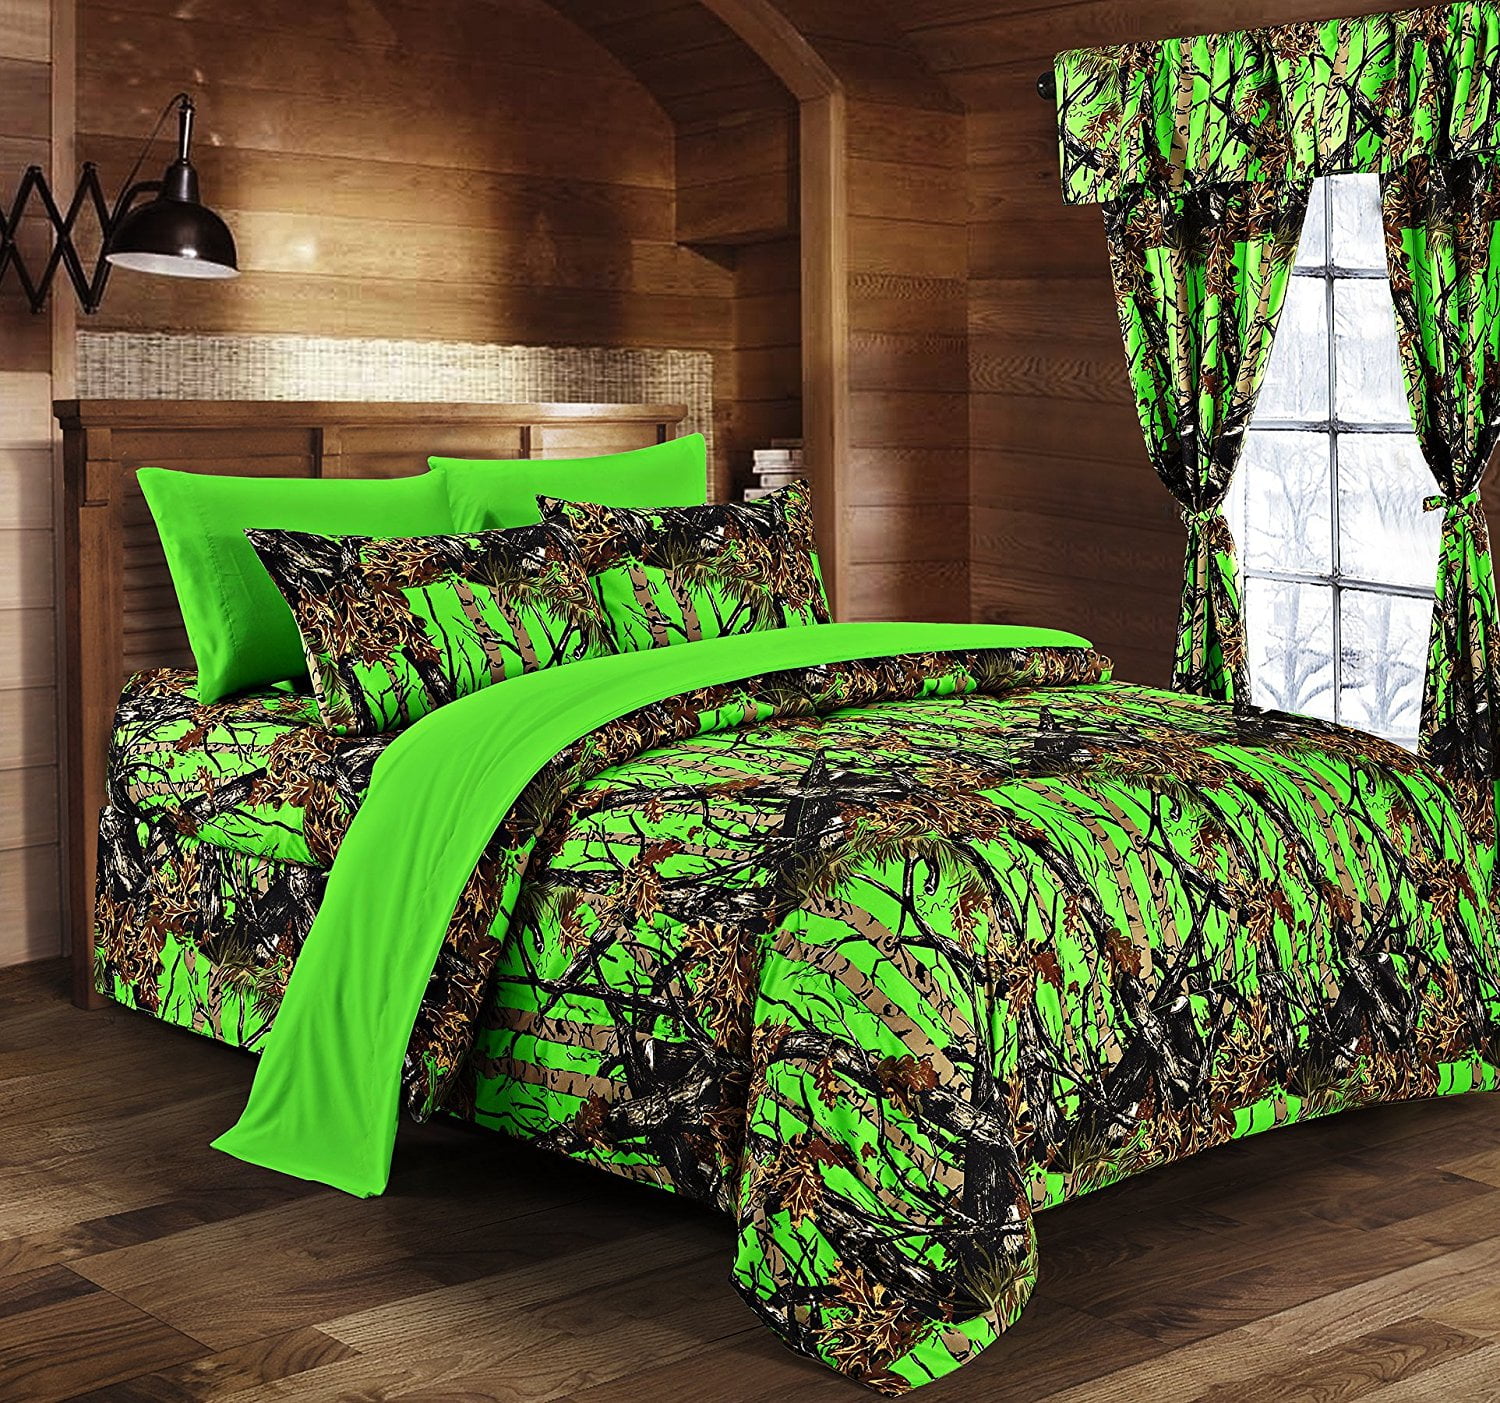 SHEET CURTAIN CAMOUFLAGE KING comforter 22 PC BLACK CAMO QUEEN MIXED SIZE SET! 